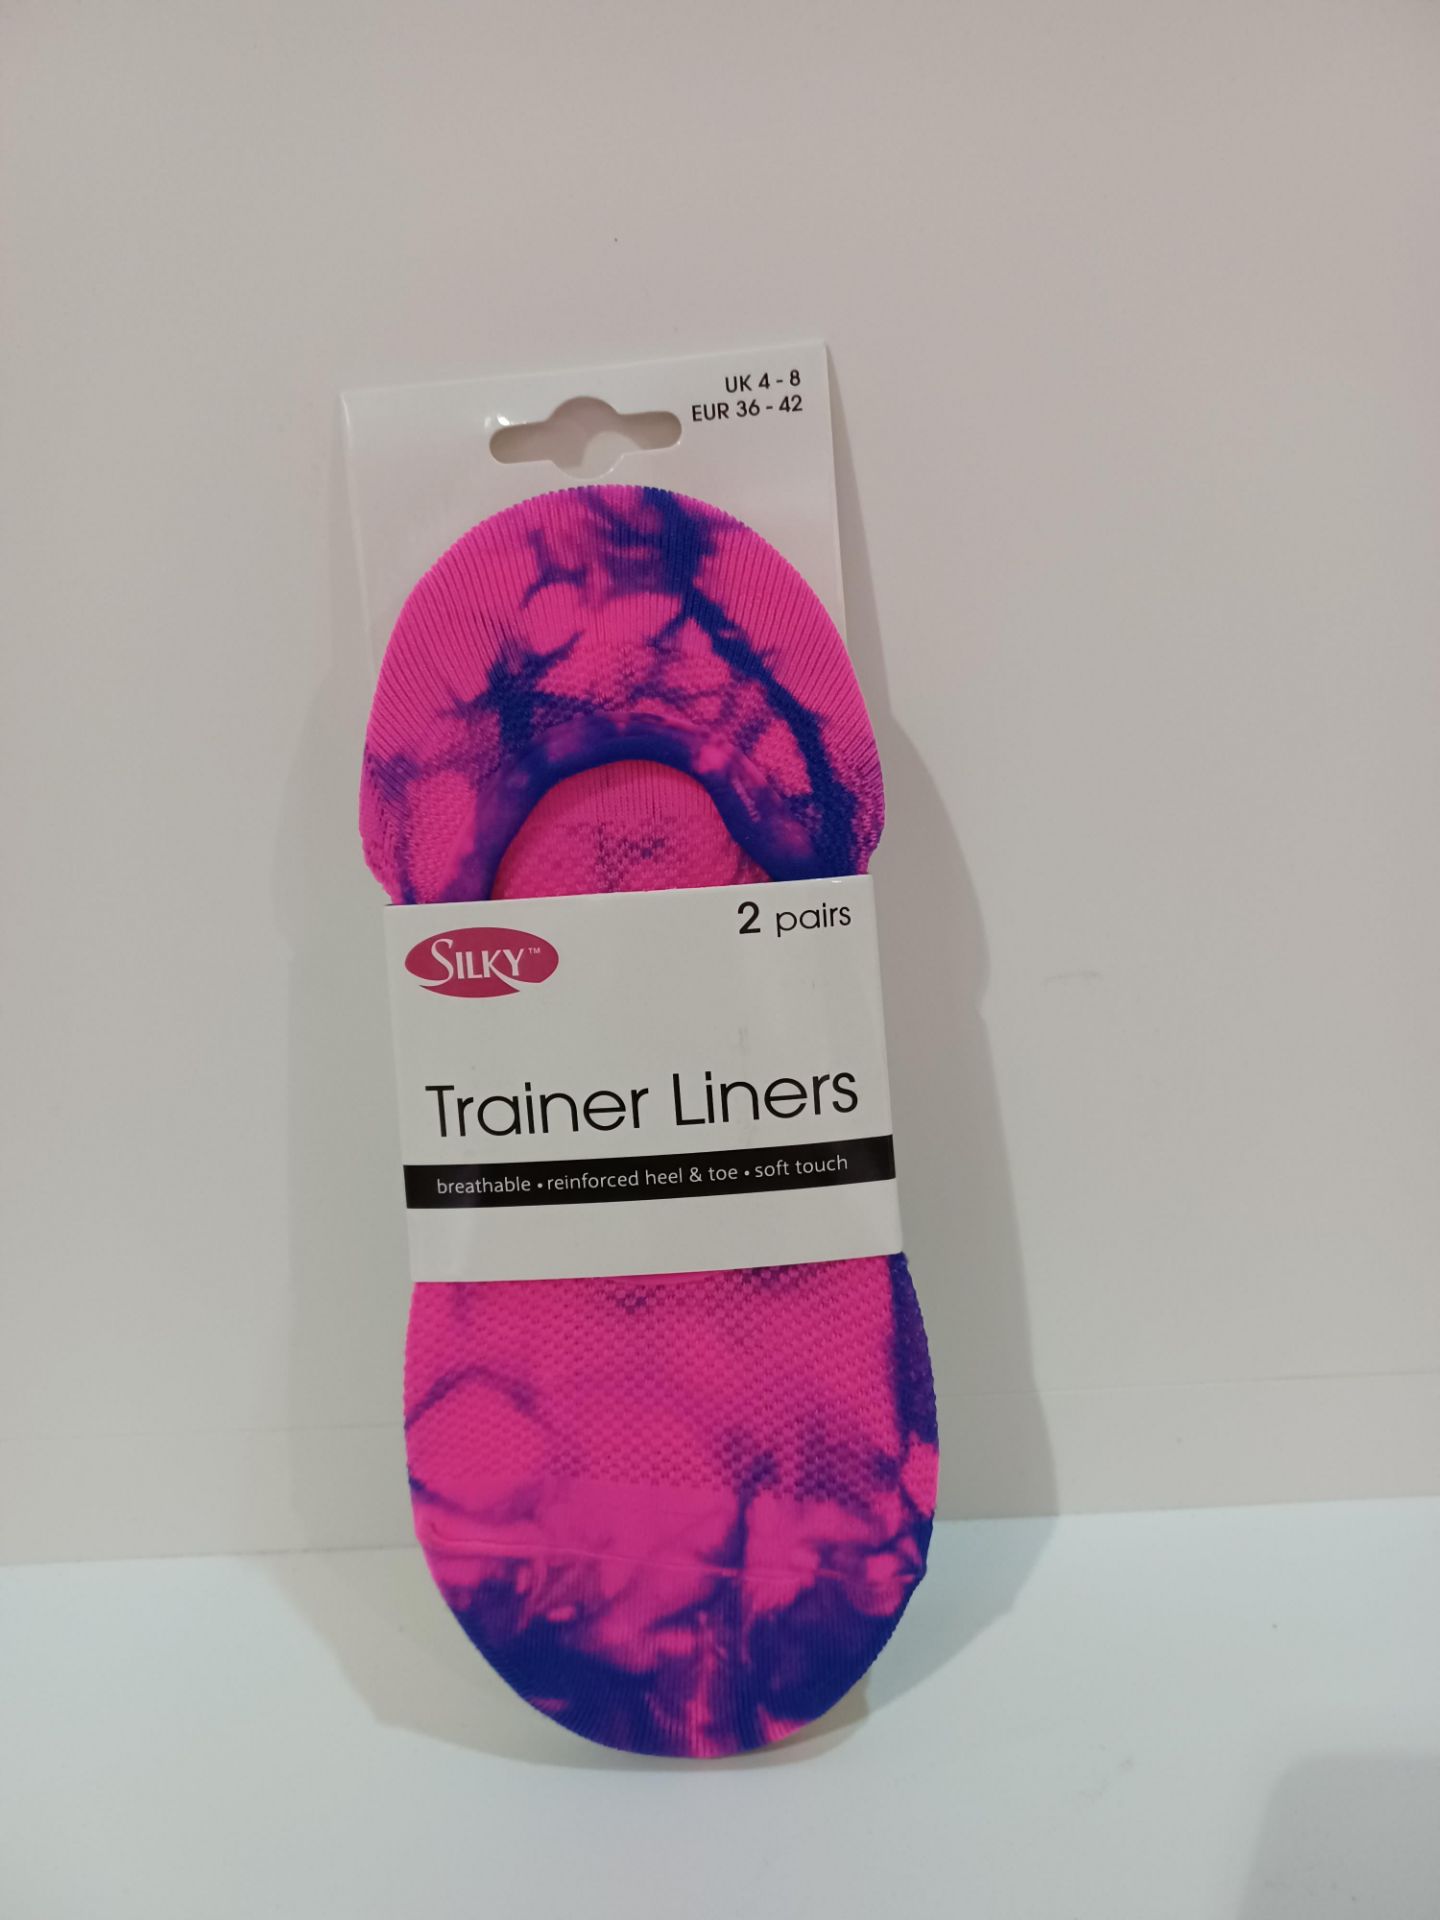 150 X NEW PACKAGED SILKY TRAINER LINERS. BREATHABLE. REINFORCED HEEL & TOE, SOFT TOUCH. ROW 15 B/W